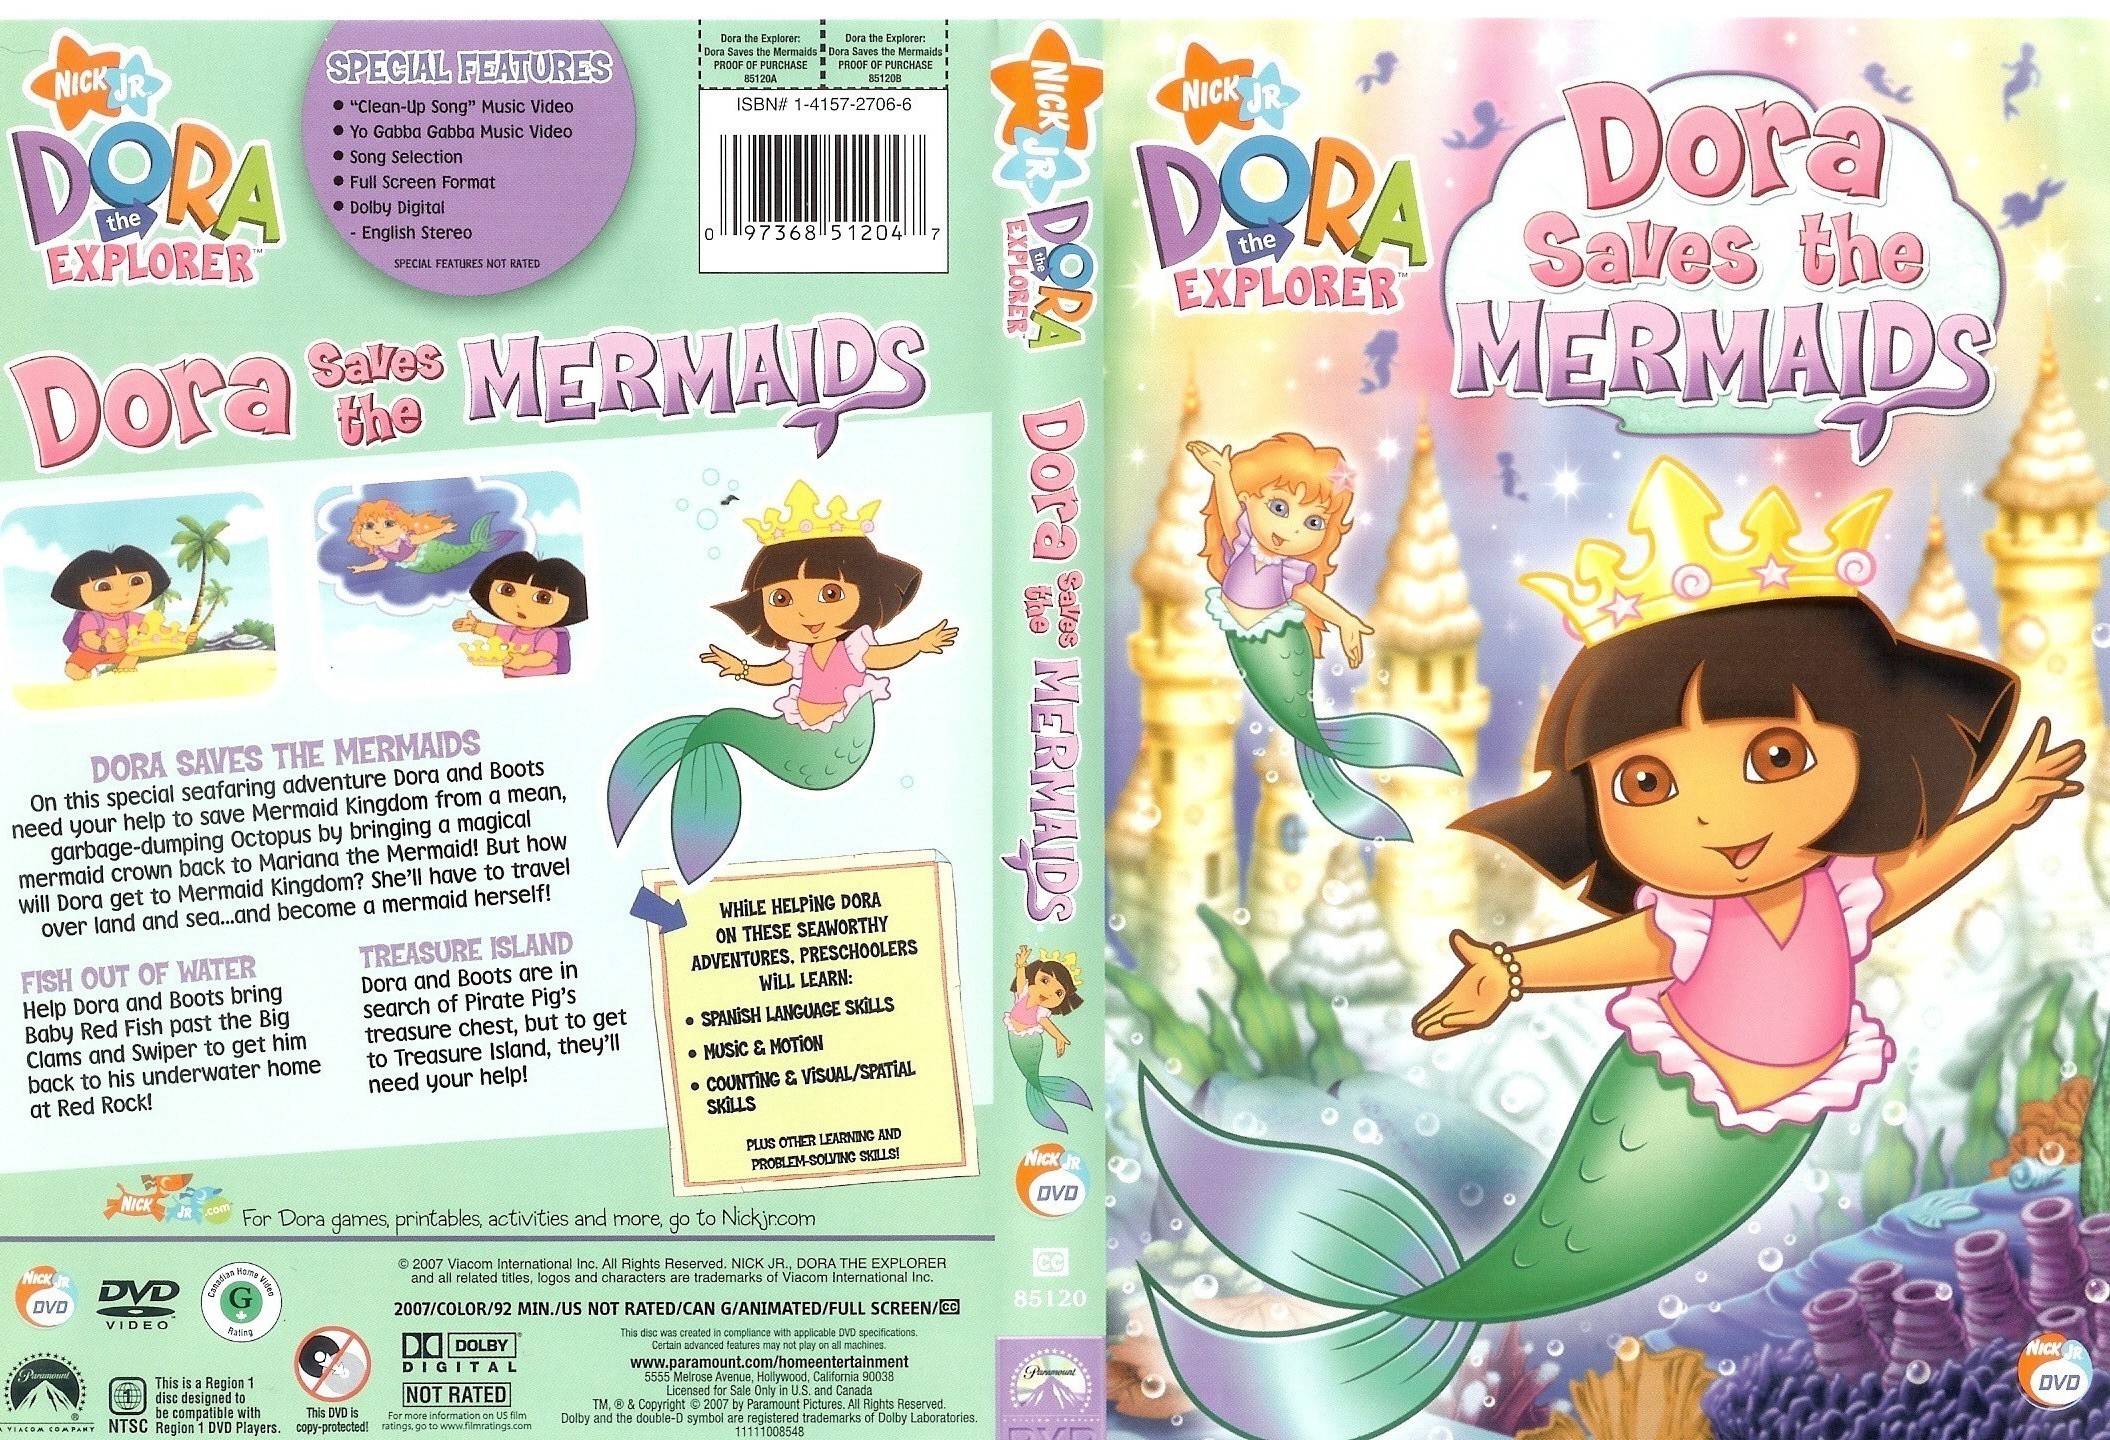 Jaquette DVD Dora saves the mermaids (Canadienne)